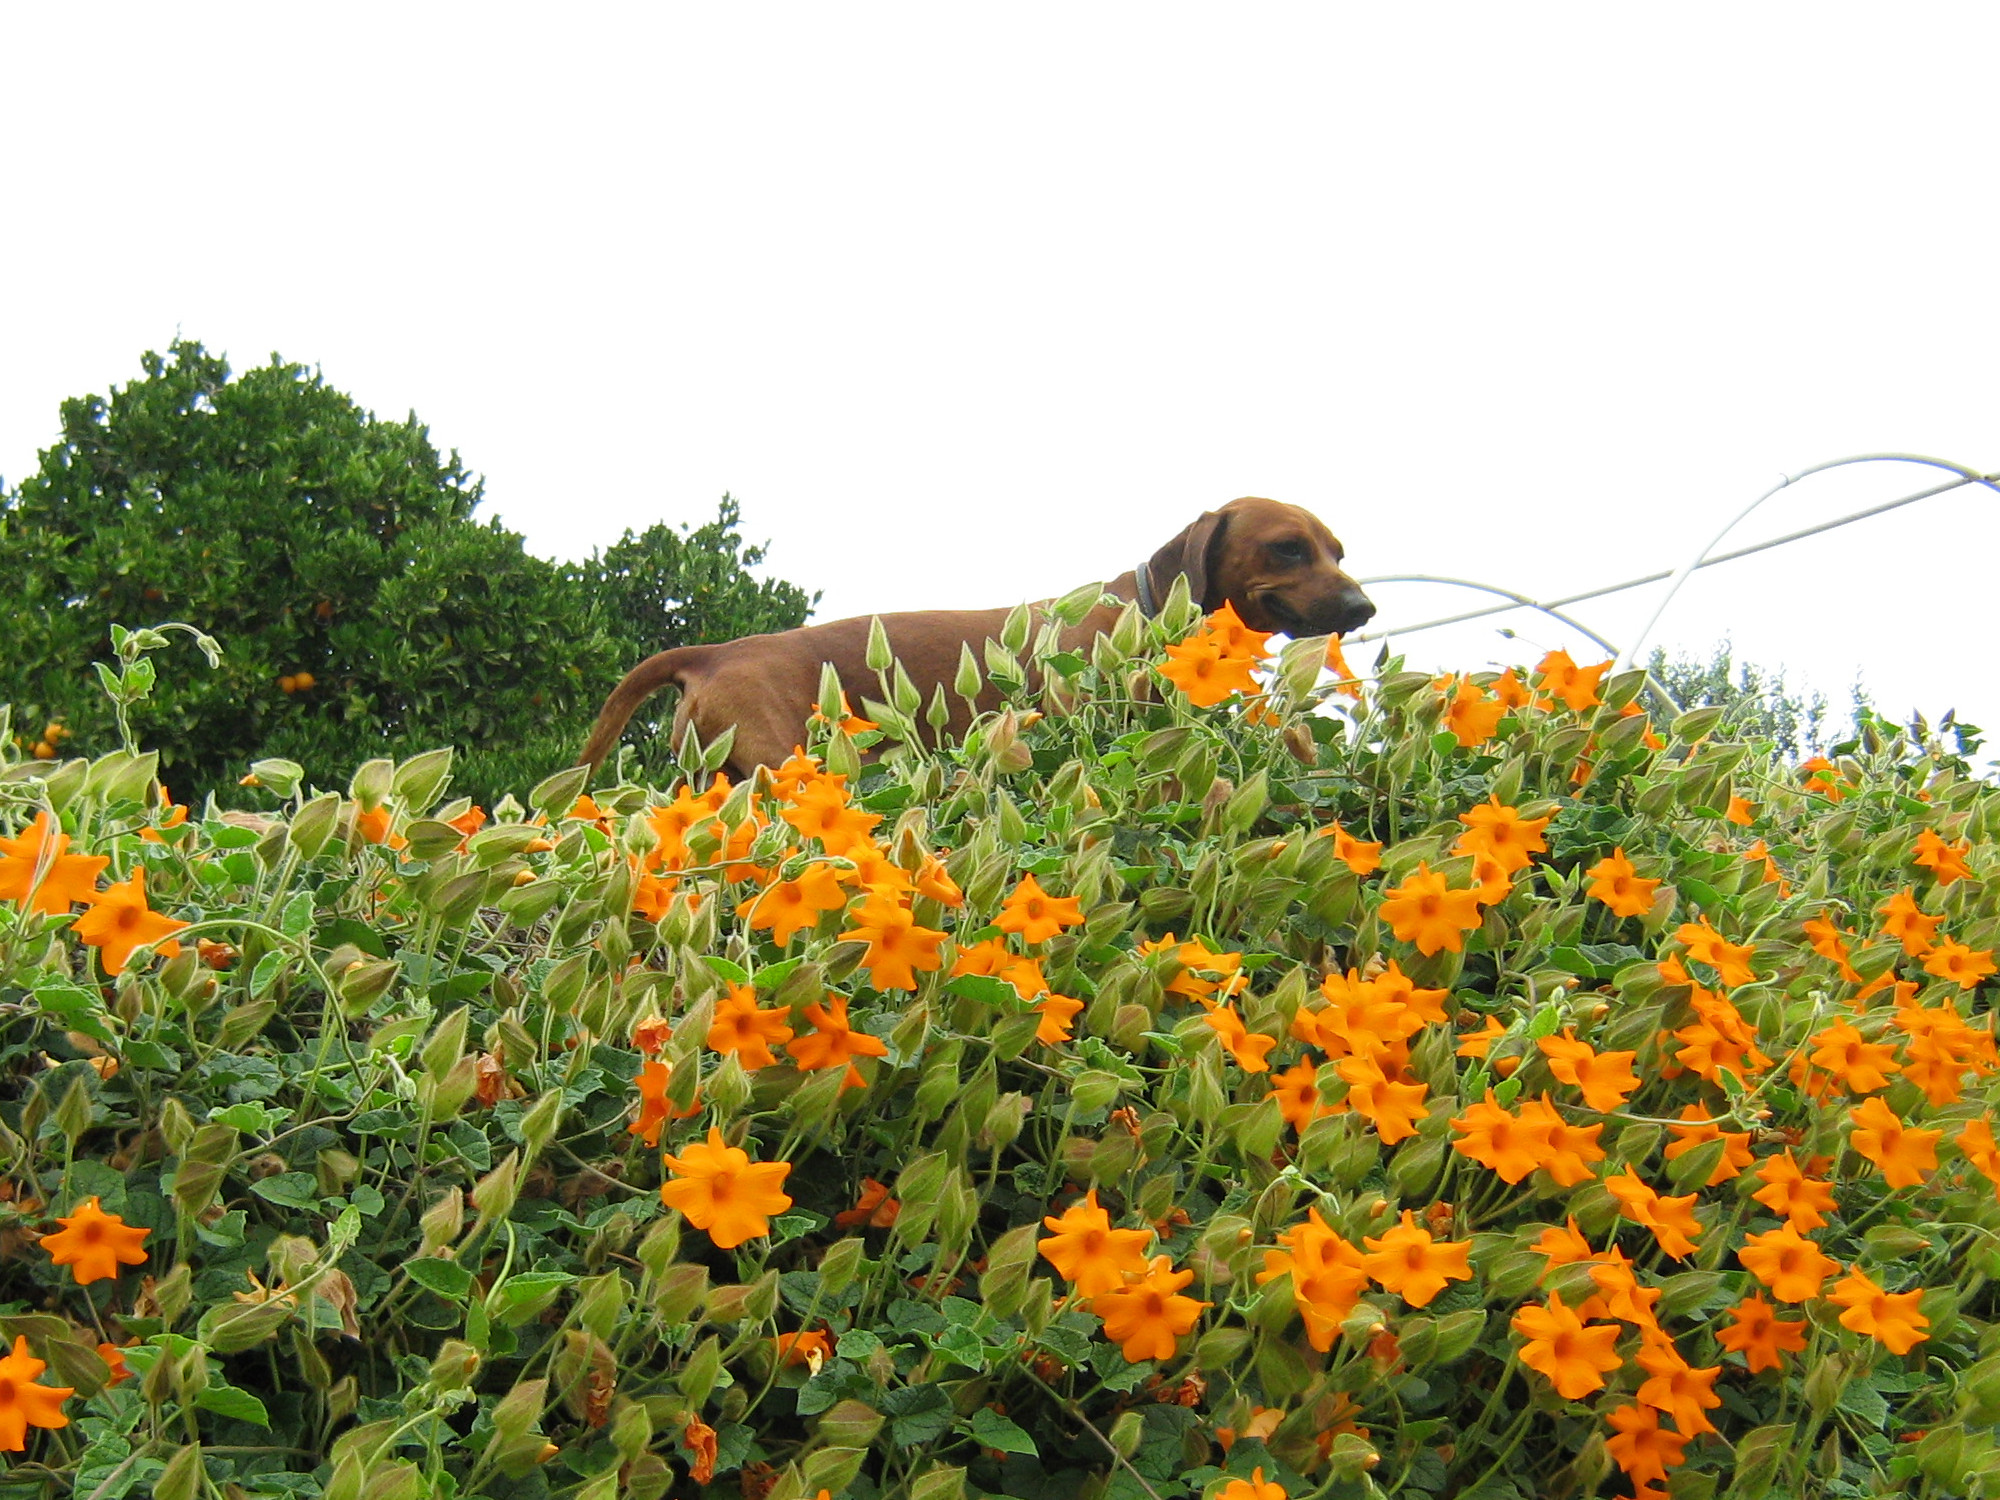 A dachshund standing in flowers on top of a duck cage